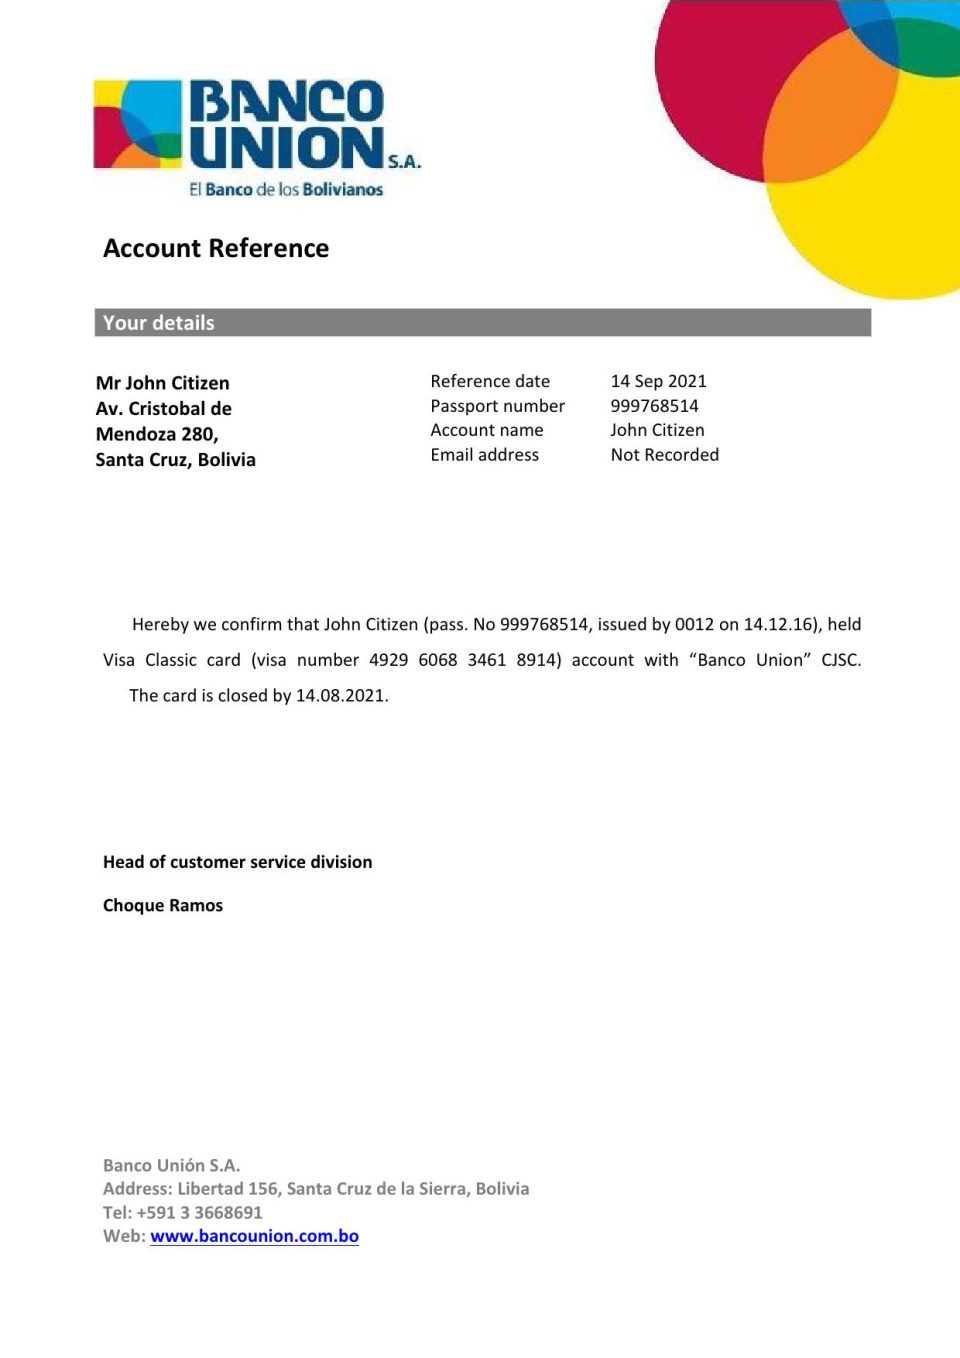 Download Bolivia Banco Union Bank Reference Letter Templates | Editable Word